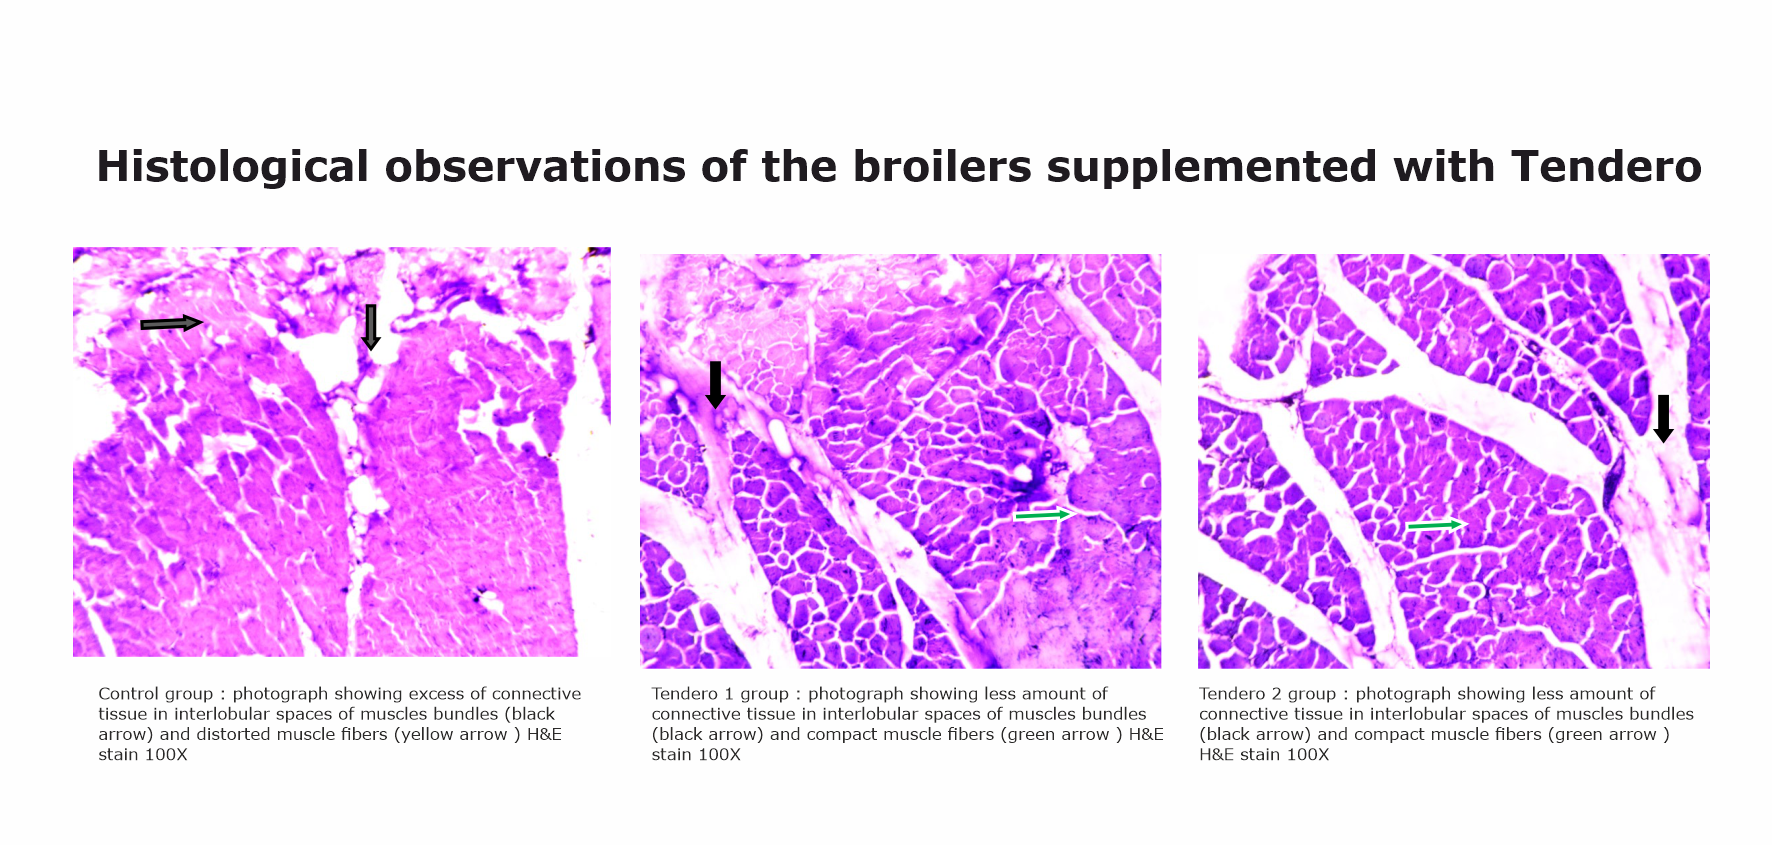 Histological observations of the broilers supplemented with Tendero